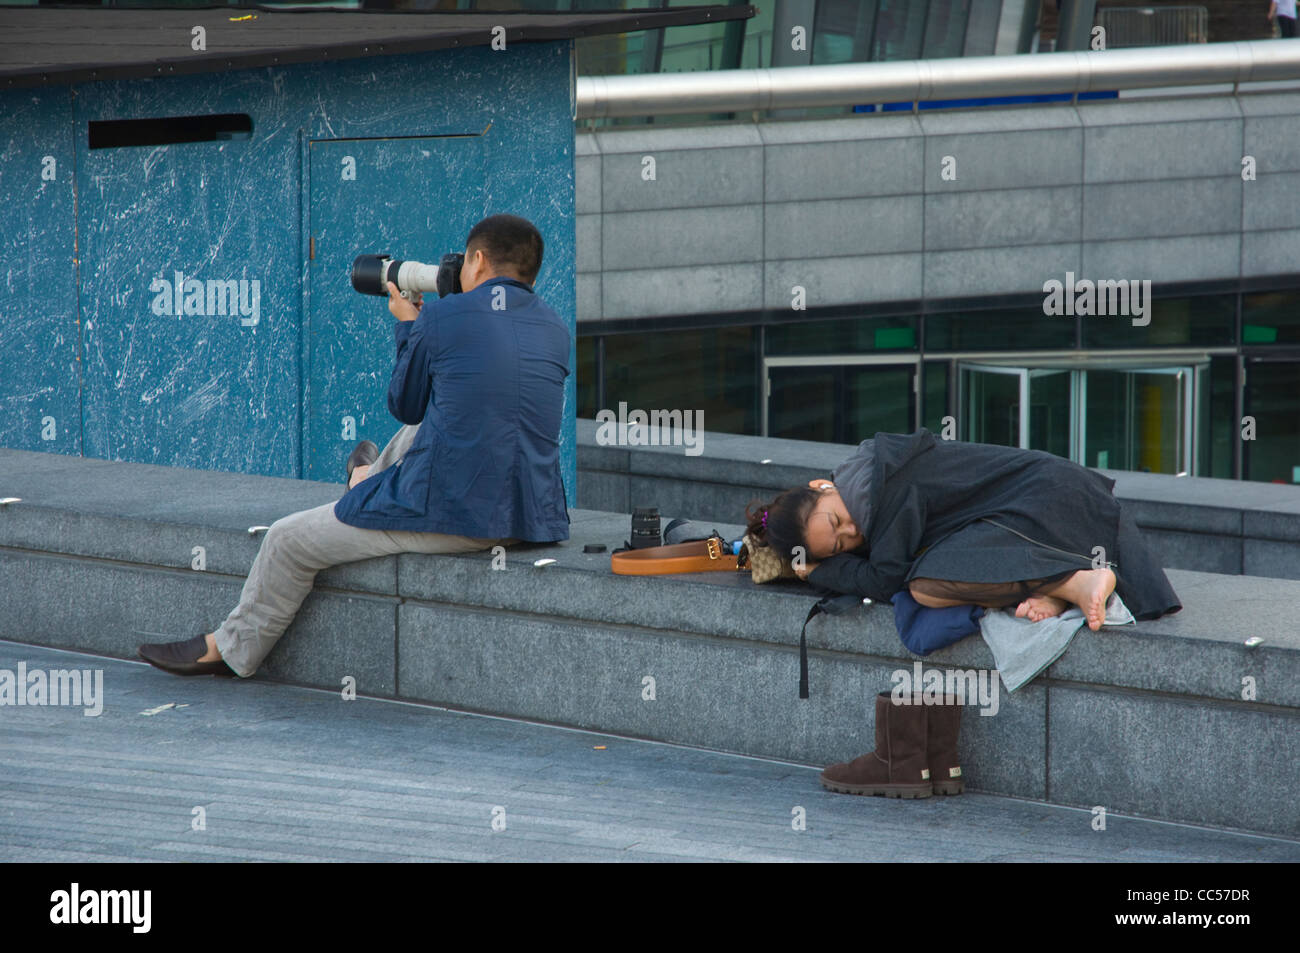 Asian man with long zoom lens taking photographs while partner is taking a nap London England UK Europe Stock Photo